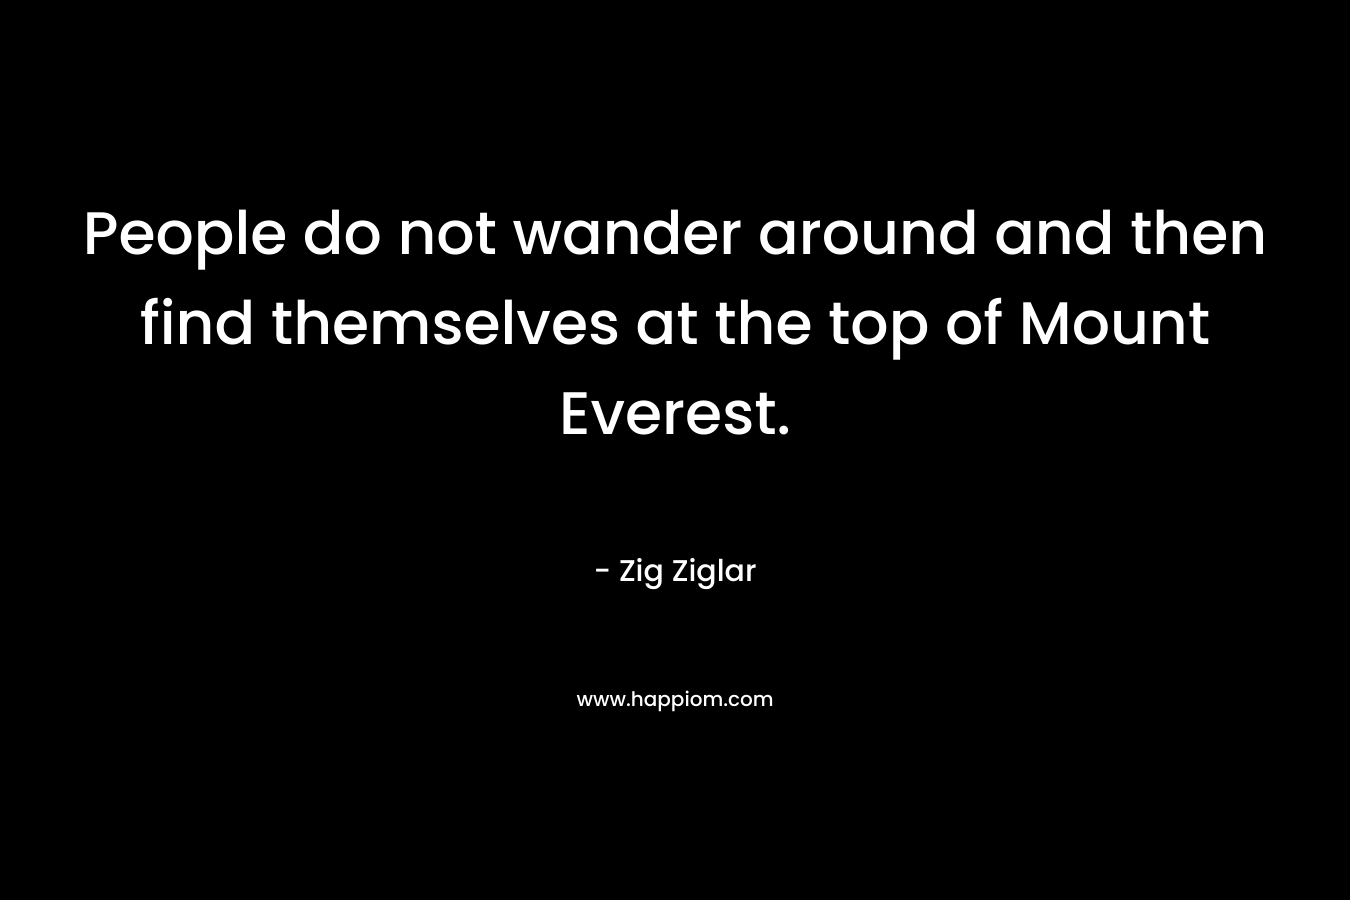 People do not wander around and then find themselves at the top of Mount Everest.